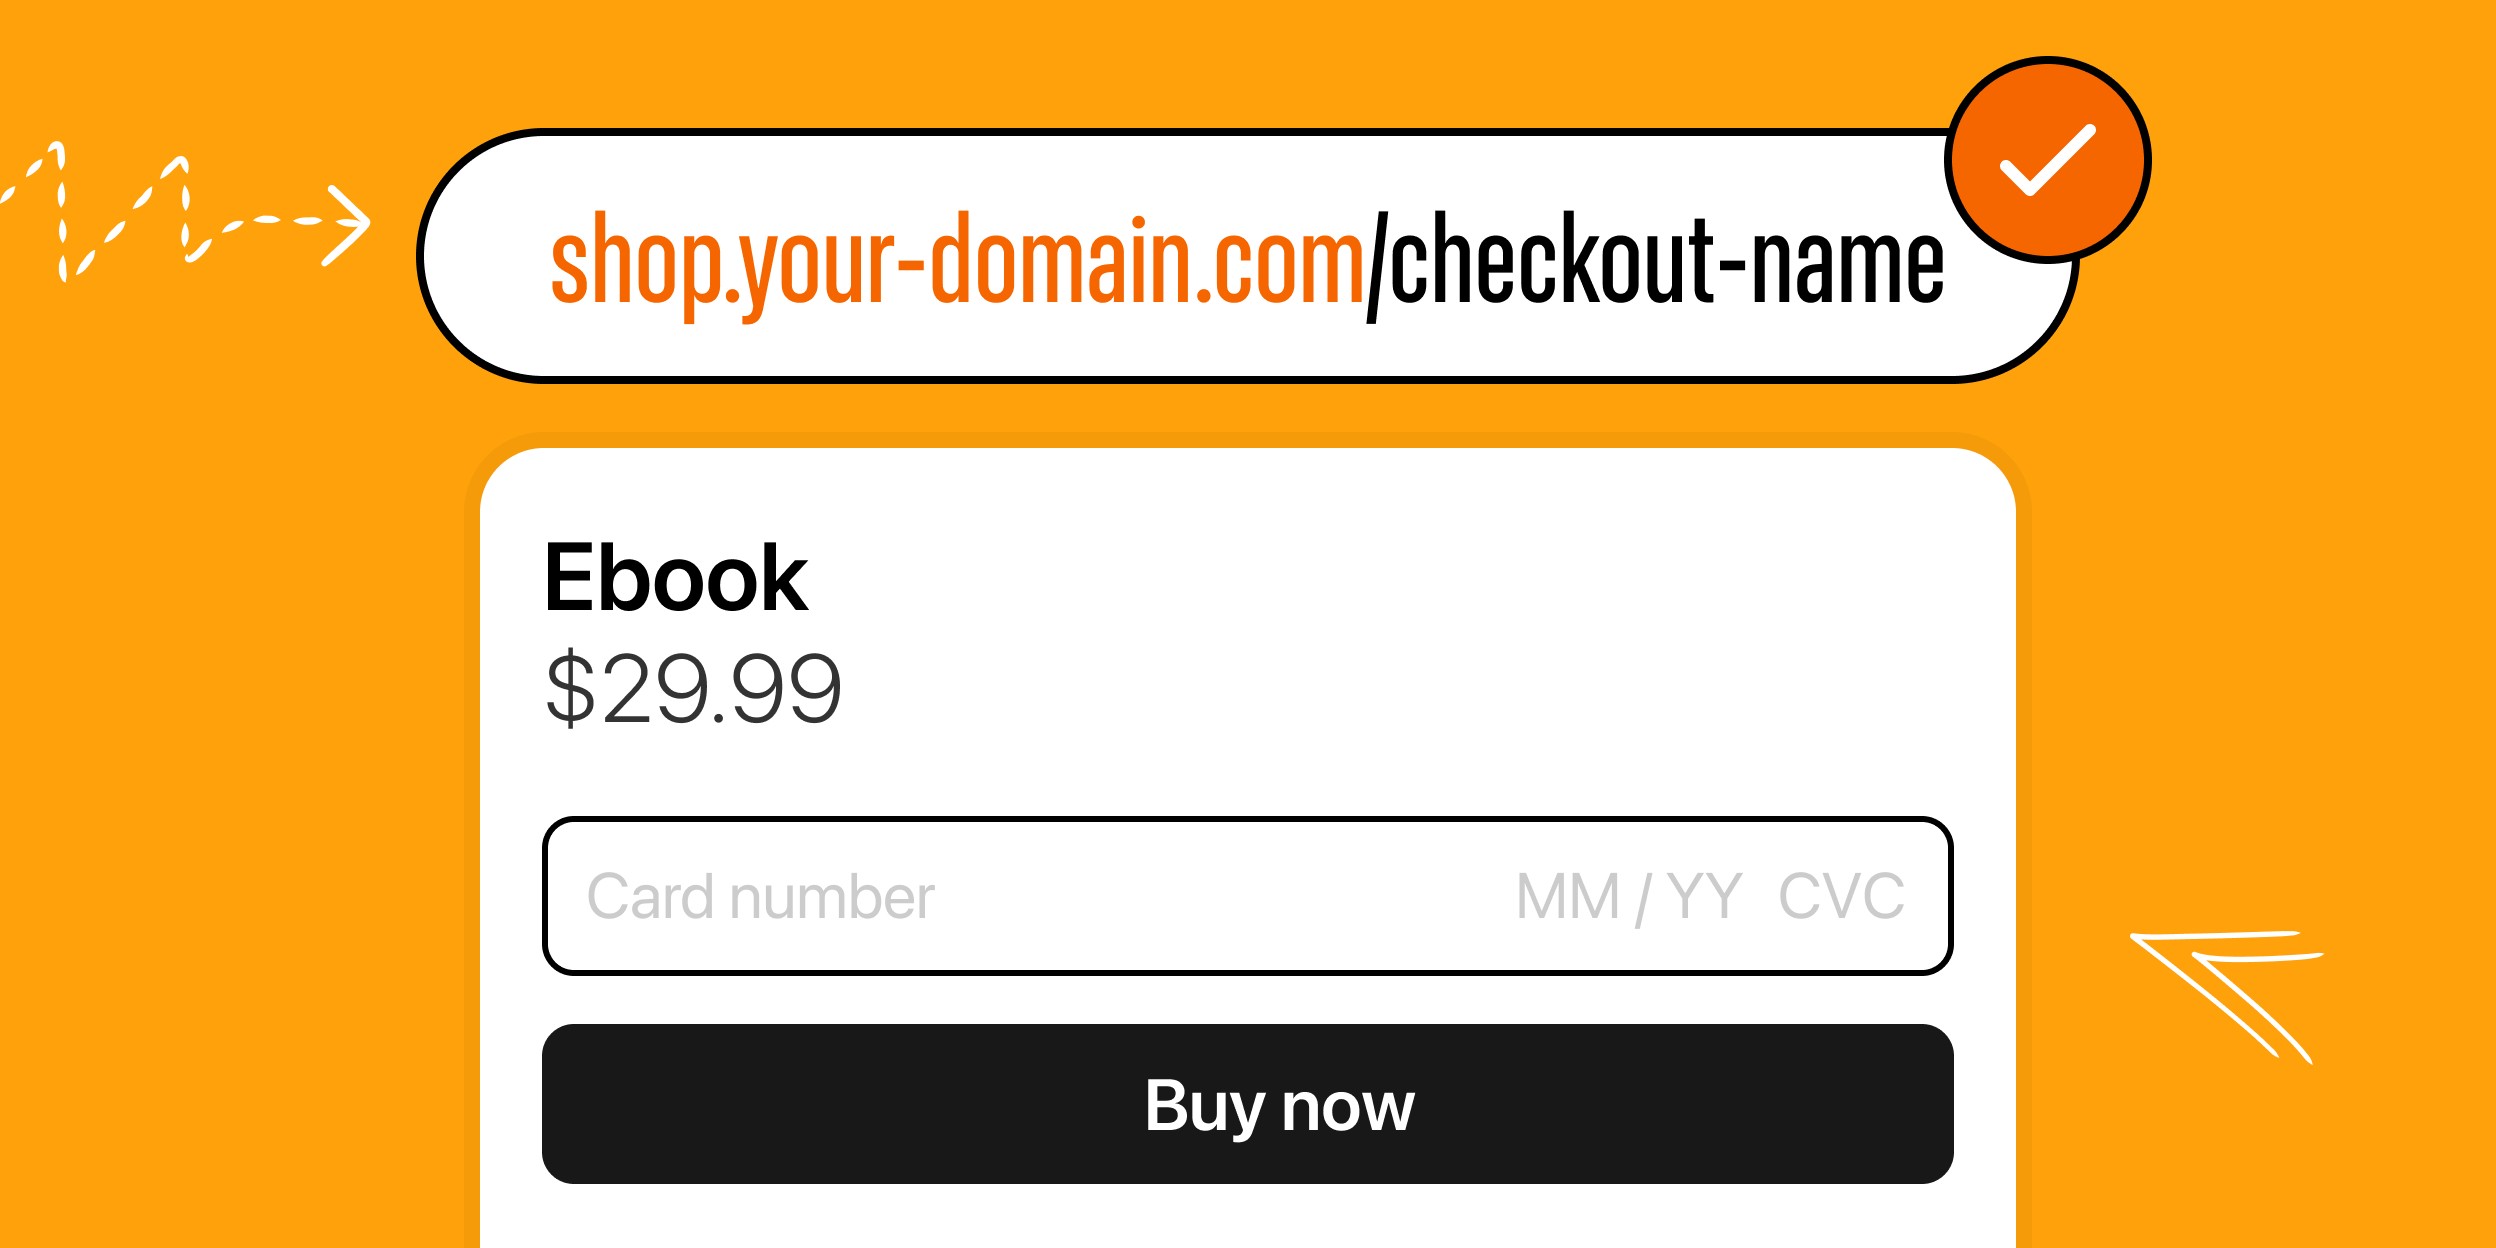 Claim your free Checkout Page URL and add a custom domain!